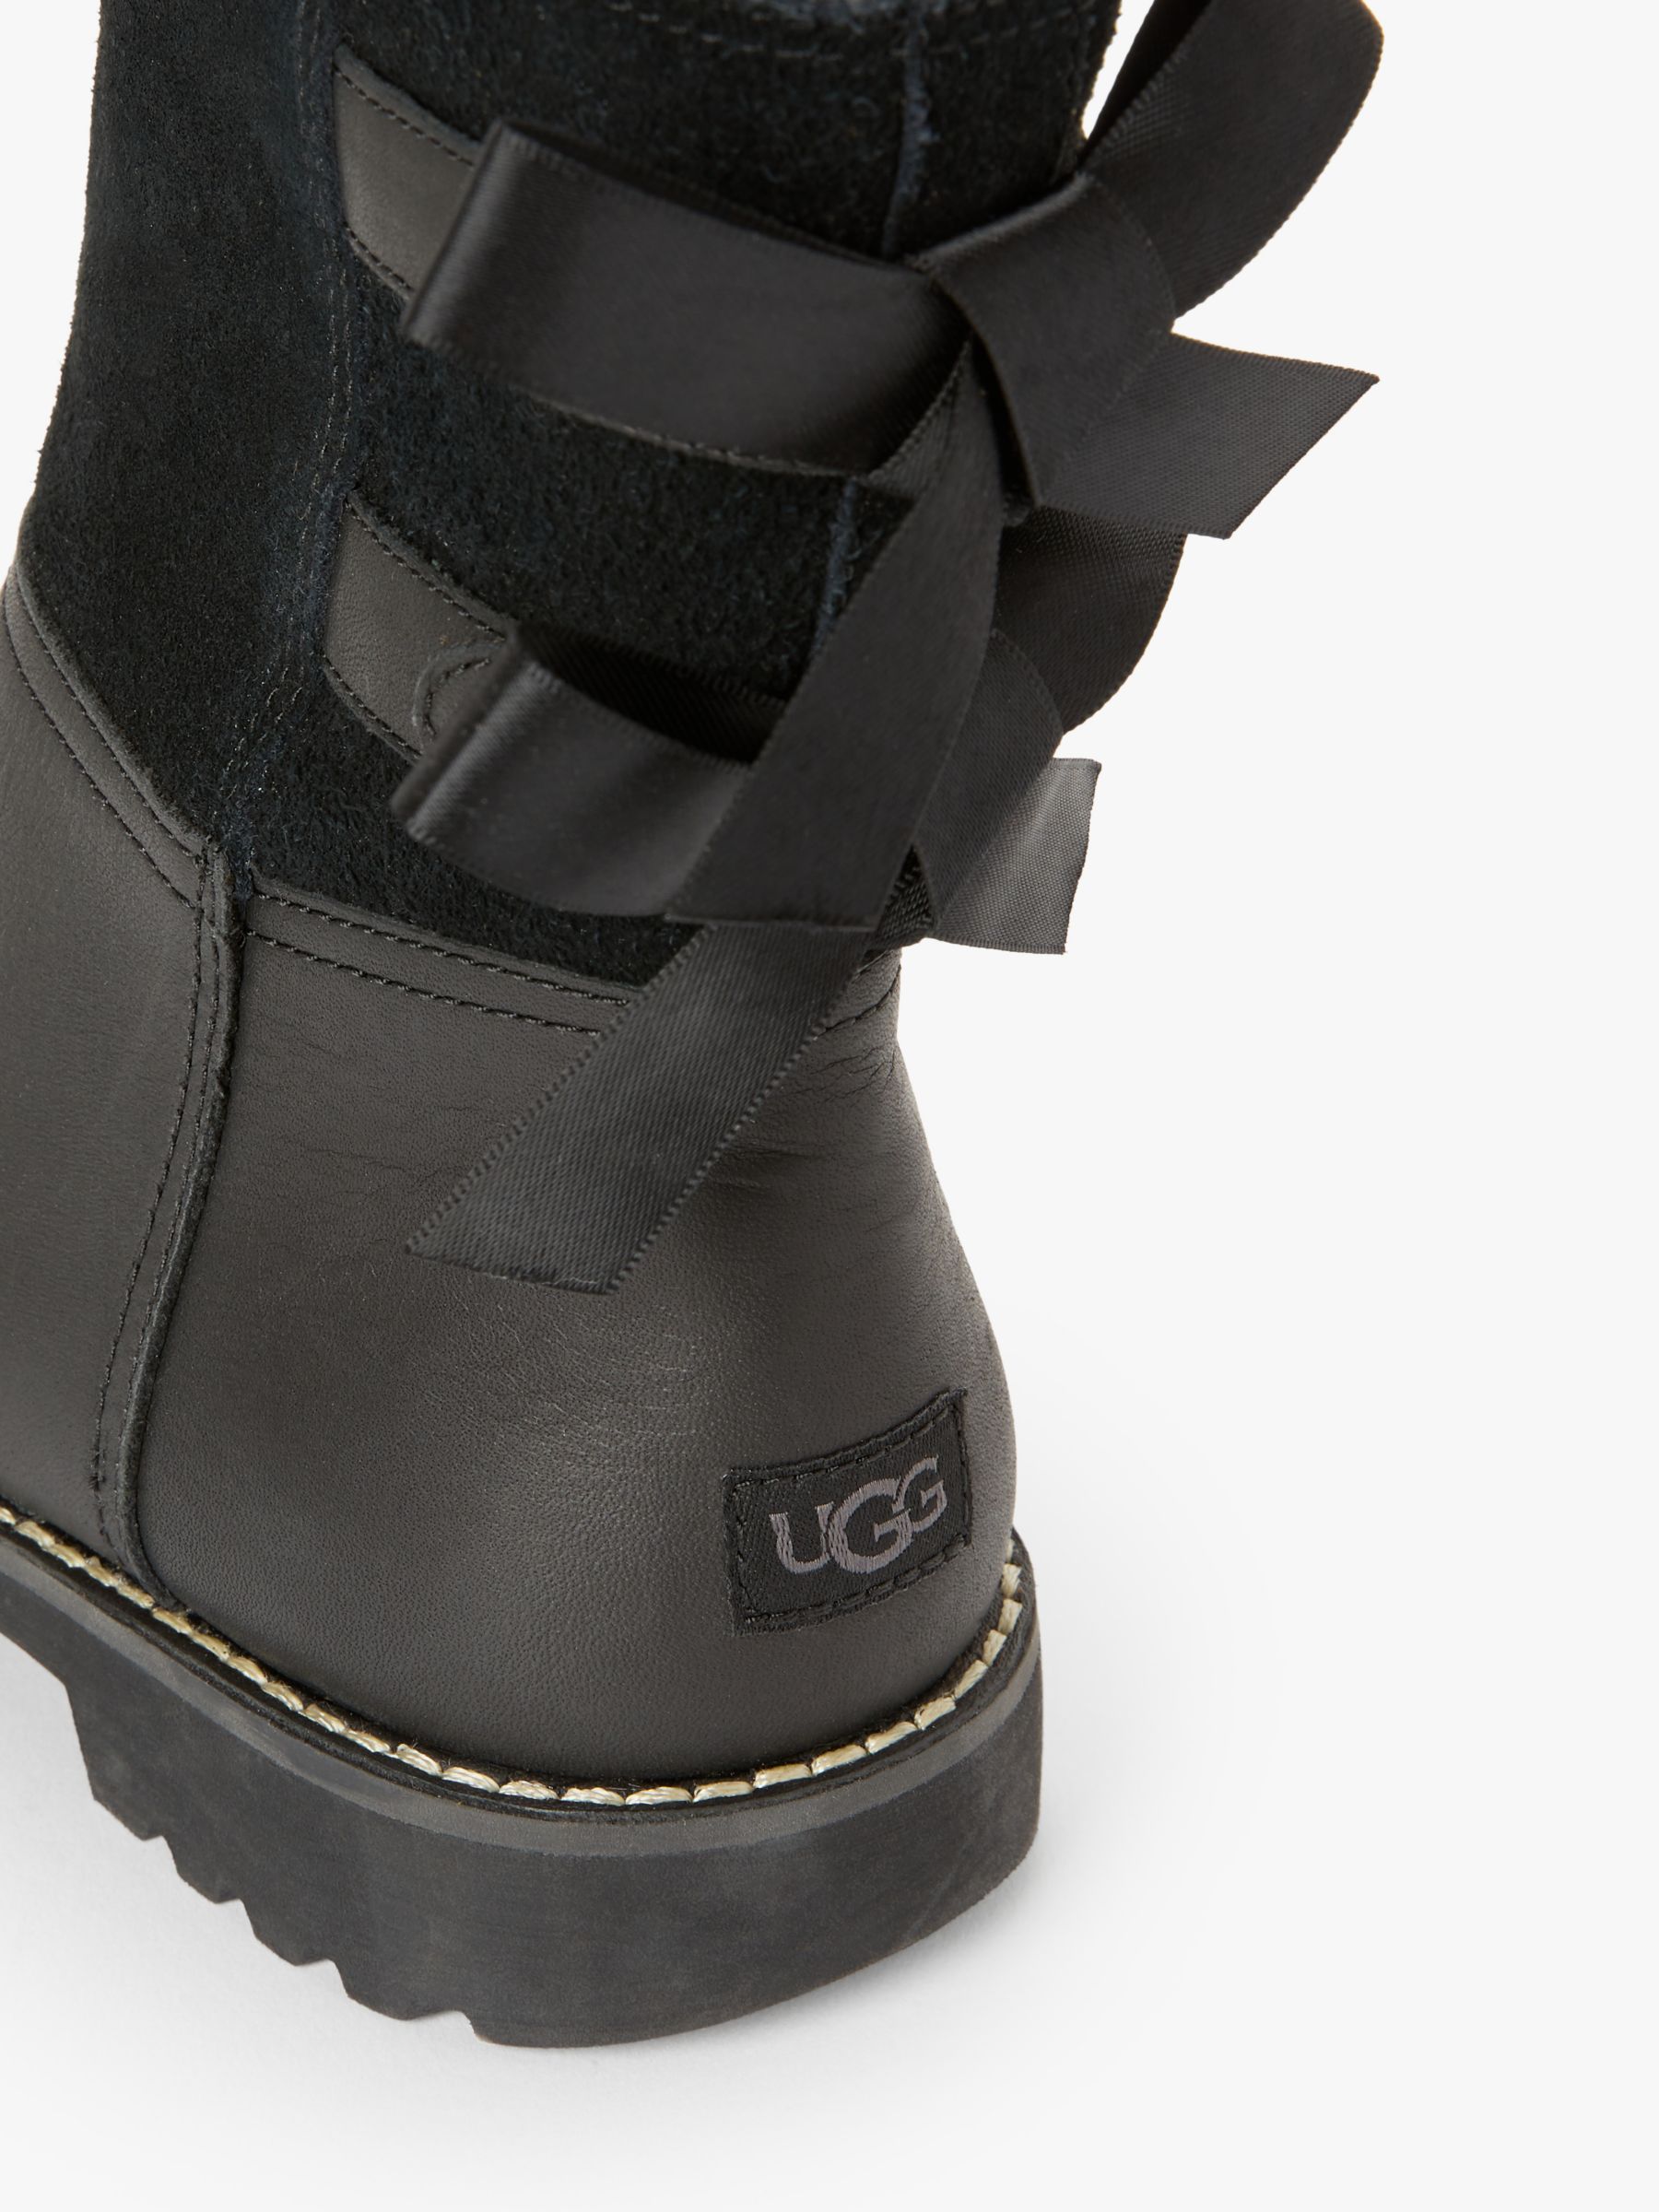 ugg leather boots